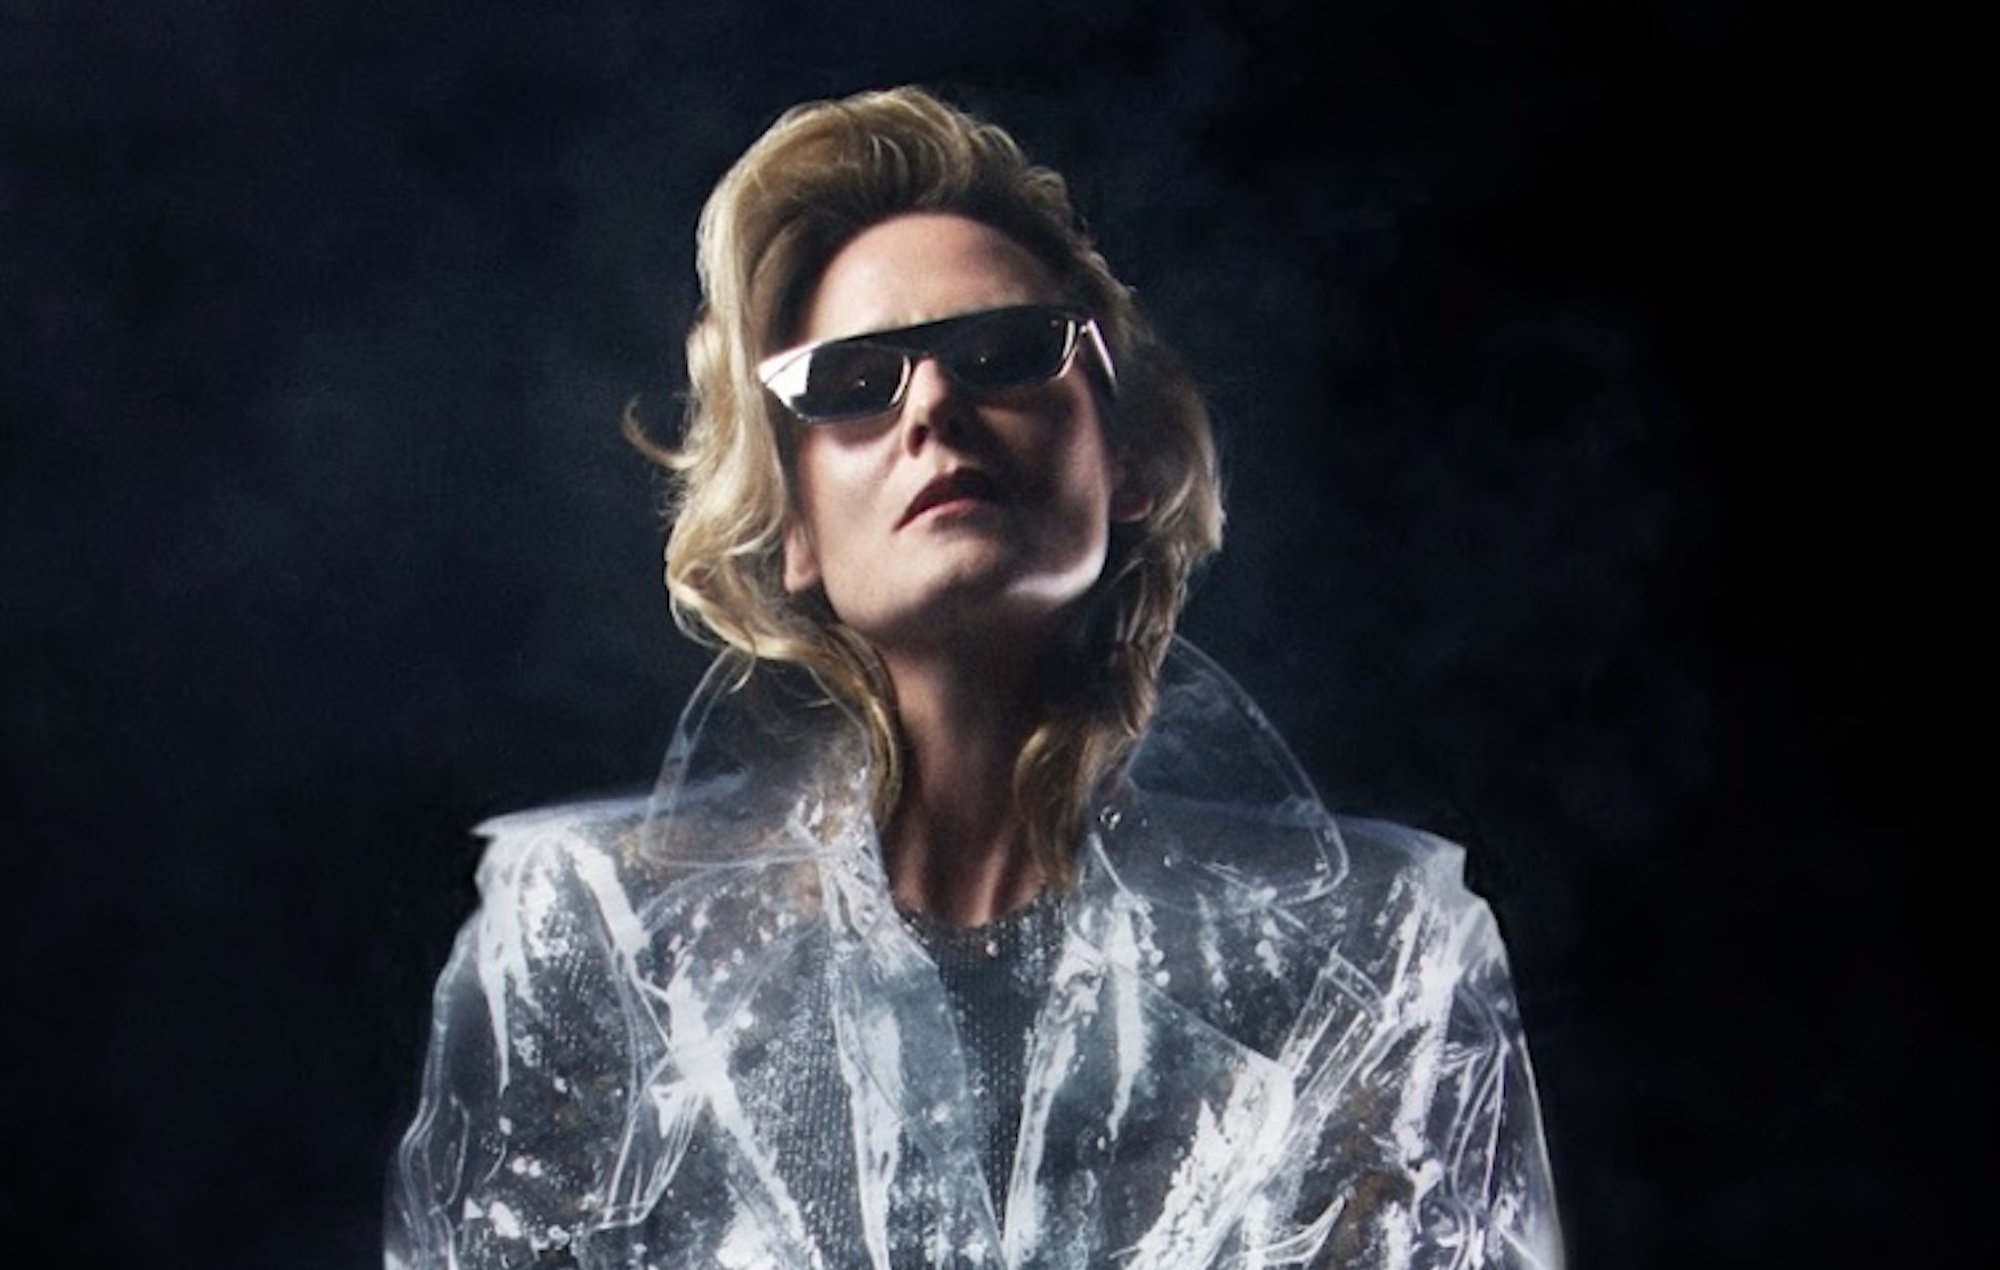 Róisín Murphy – ‘Hit Parade’ review: an accomplished record marred by controversy